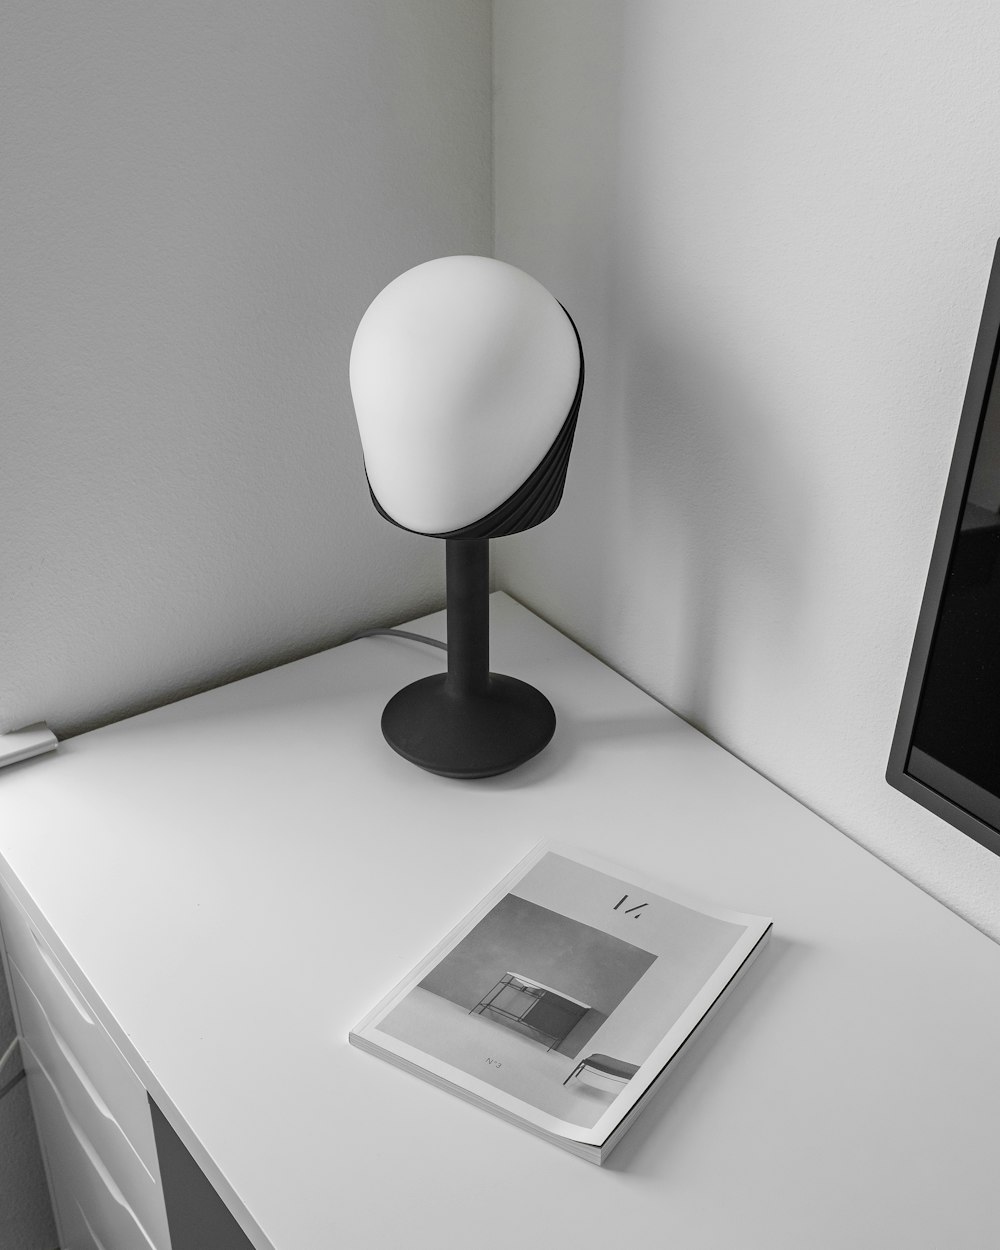 manual beside table lamp on table